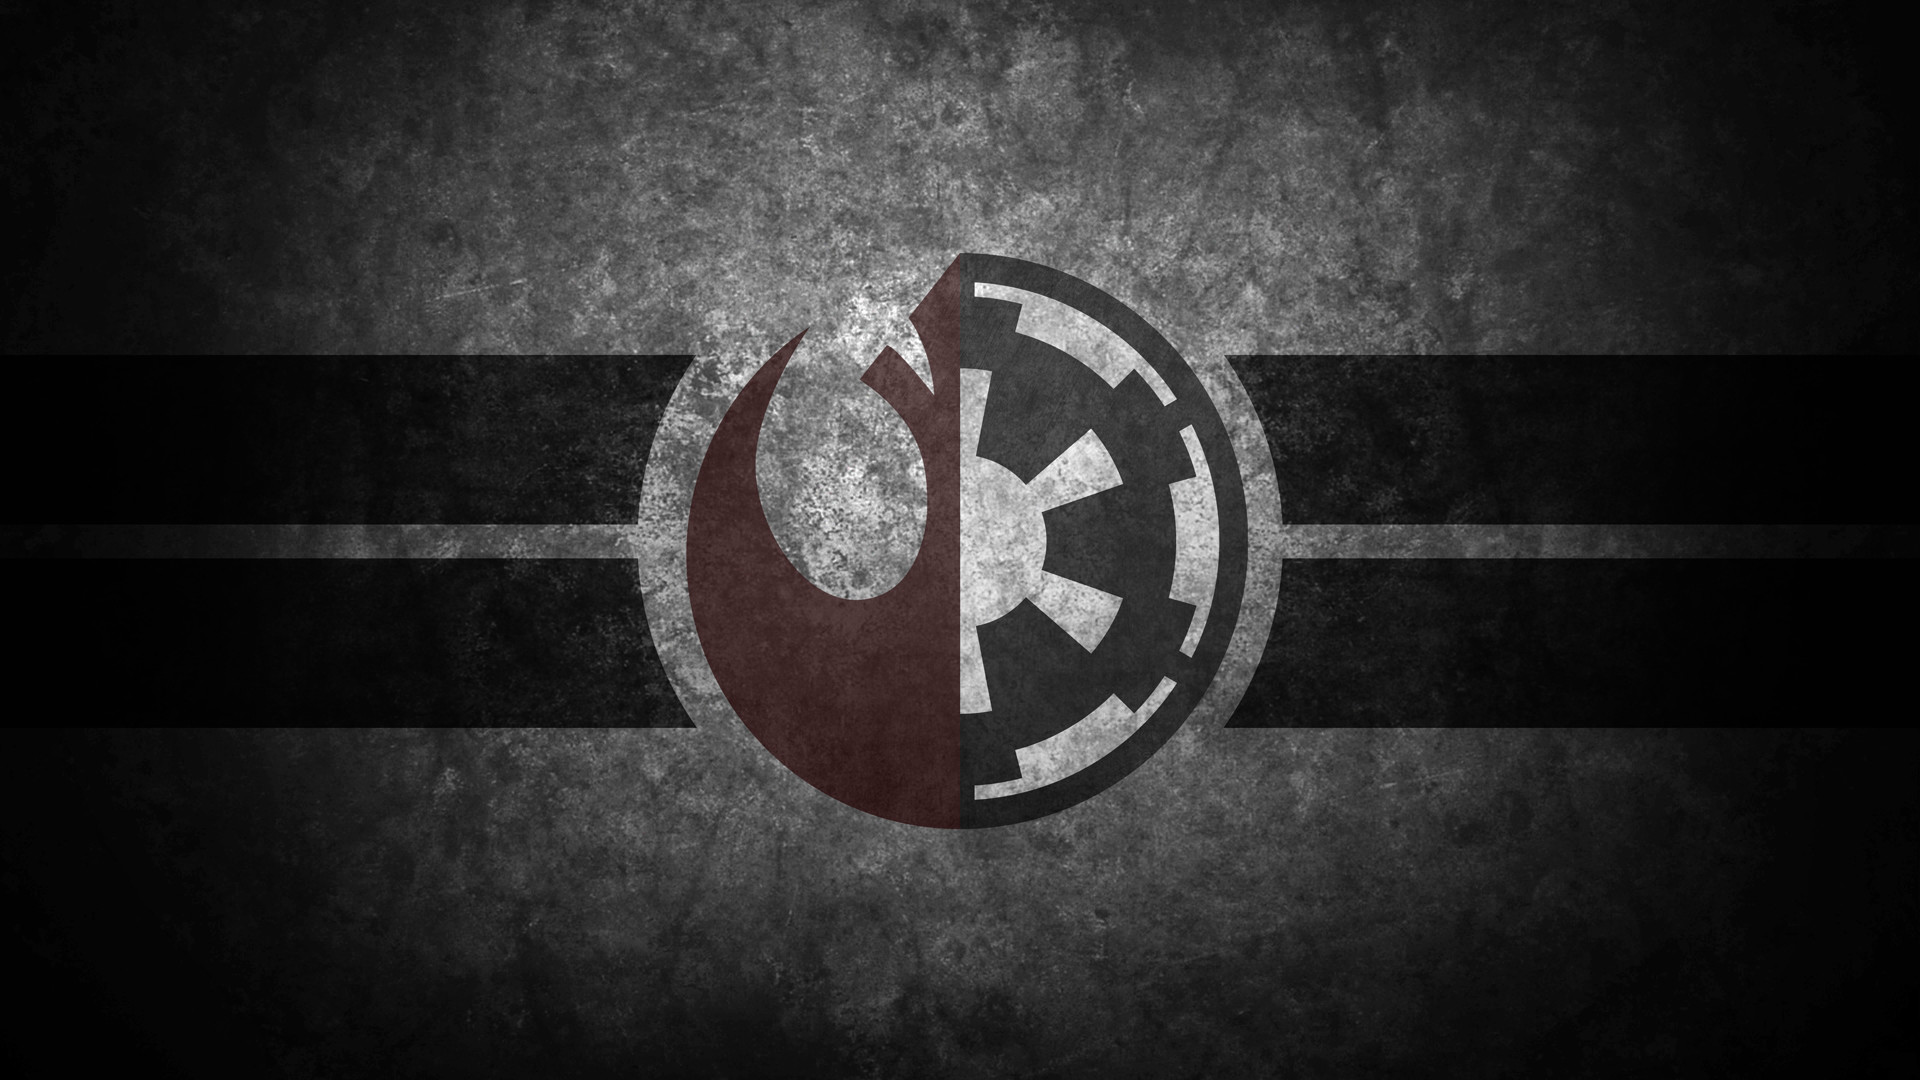 1920x1080 ... A wallpaper you guys might like. The Jedi Order emblem. I'll do Rebel  ...